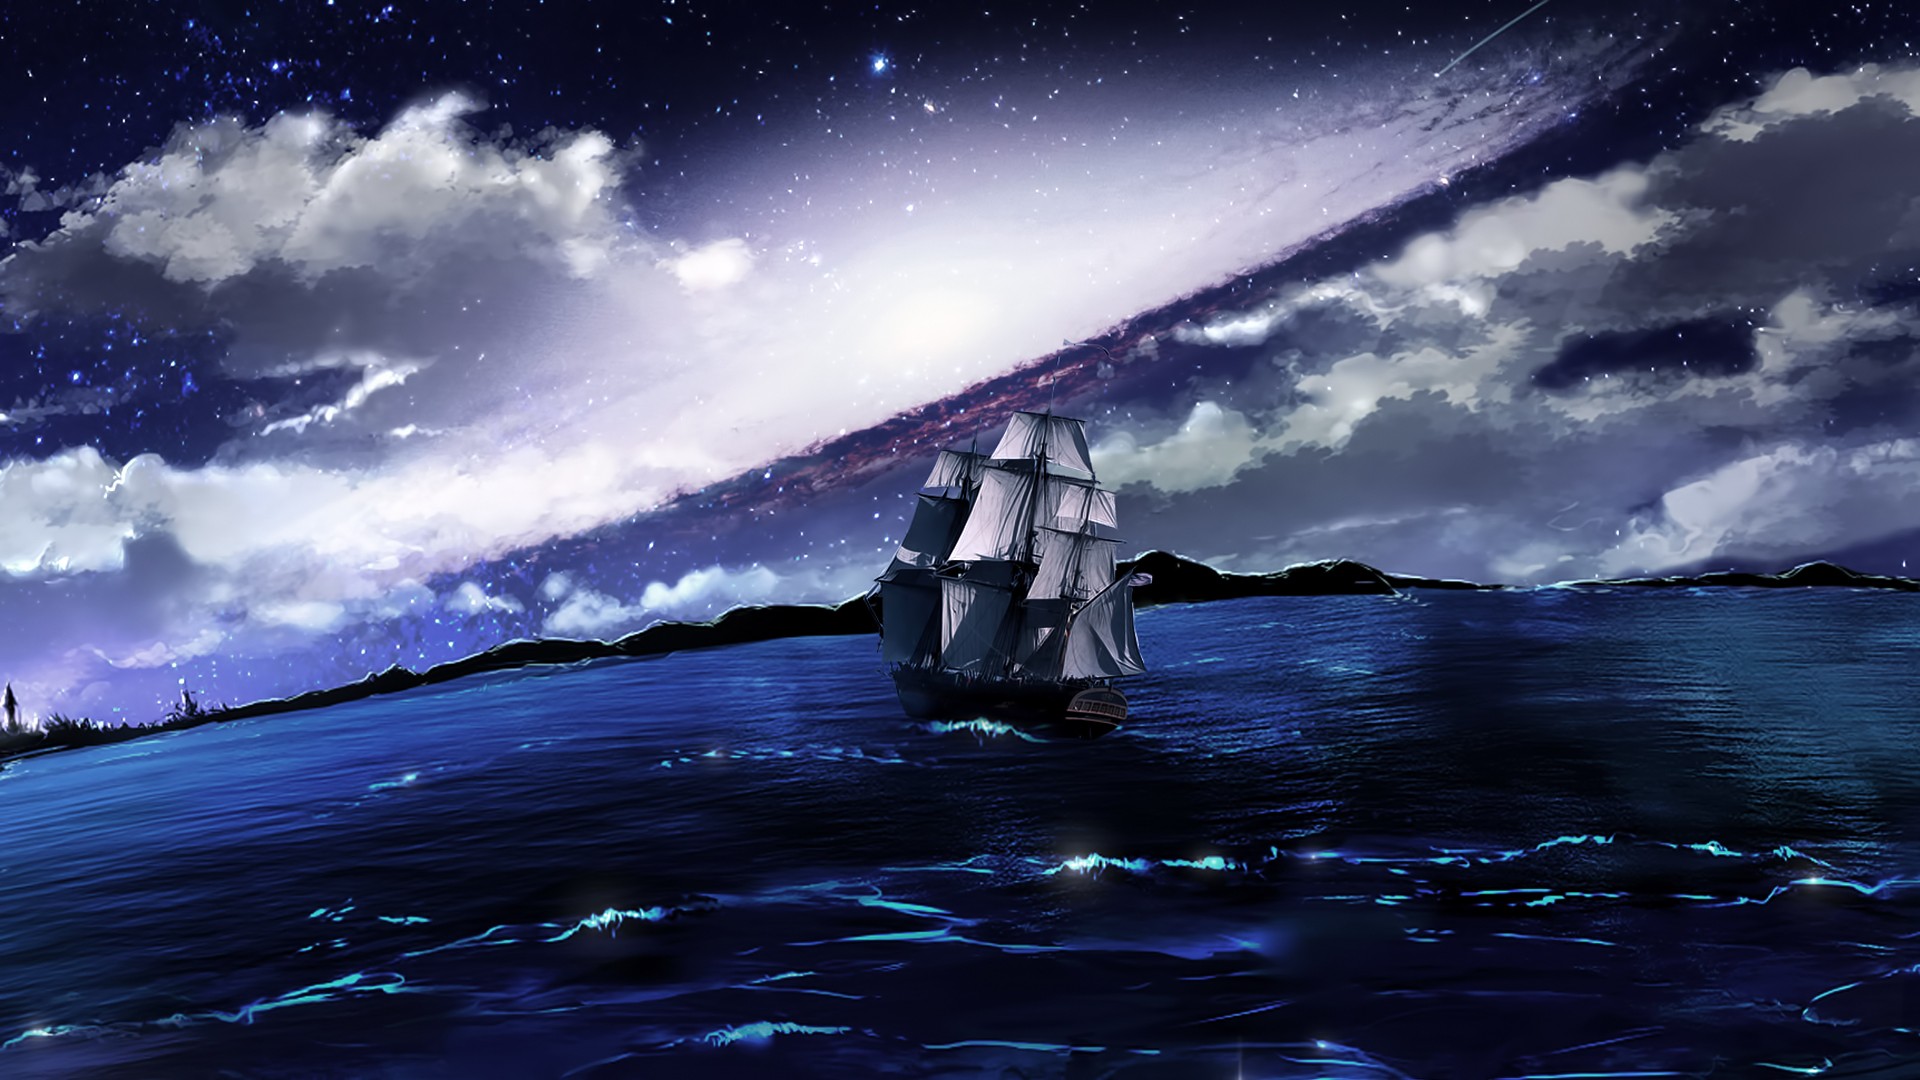 outer, Space, Galaxies, Ships, Fantasy, Art, Journey, Sea Wallpaper